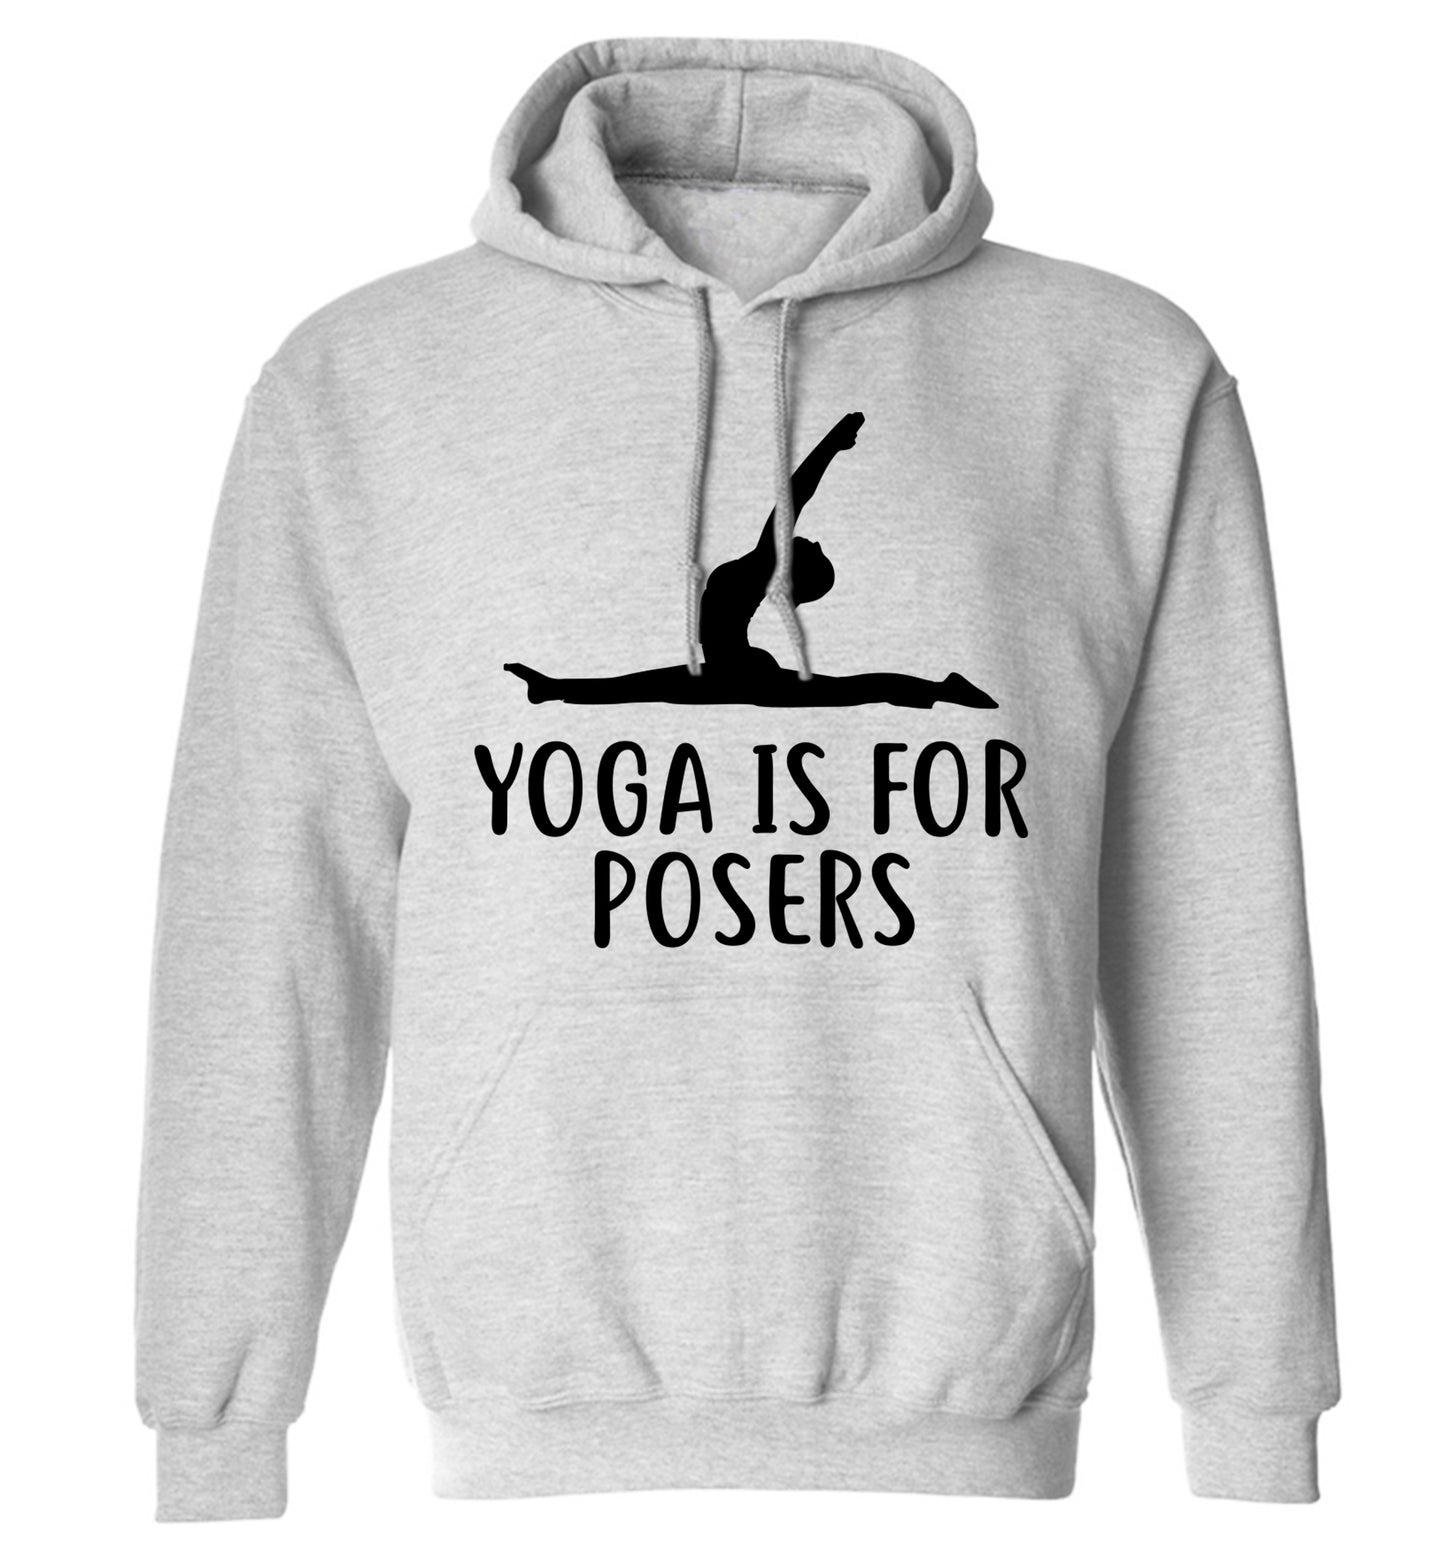 Yoga is for posers adults unisex grey hoodie 2XL